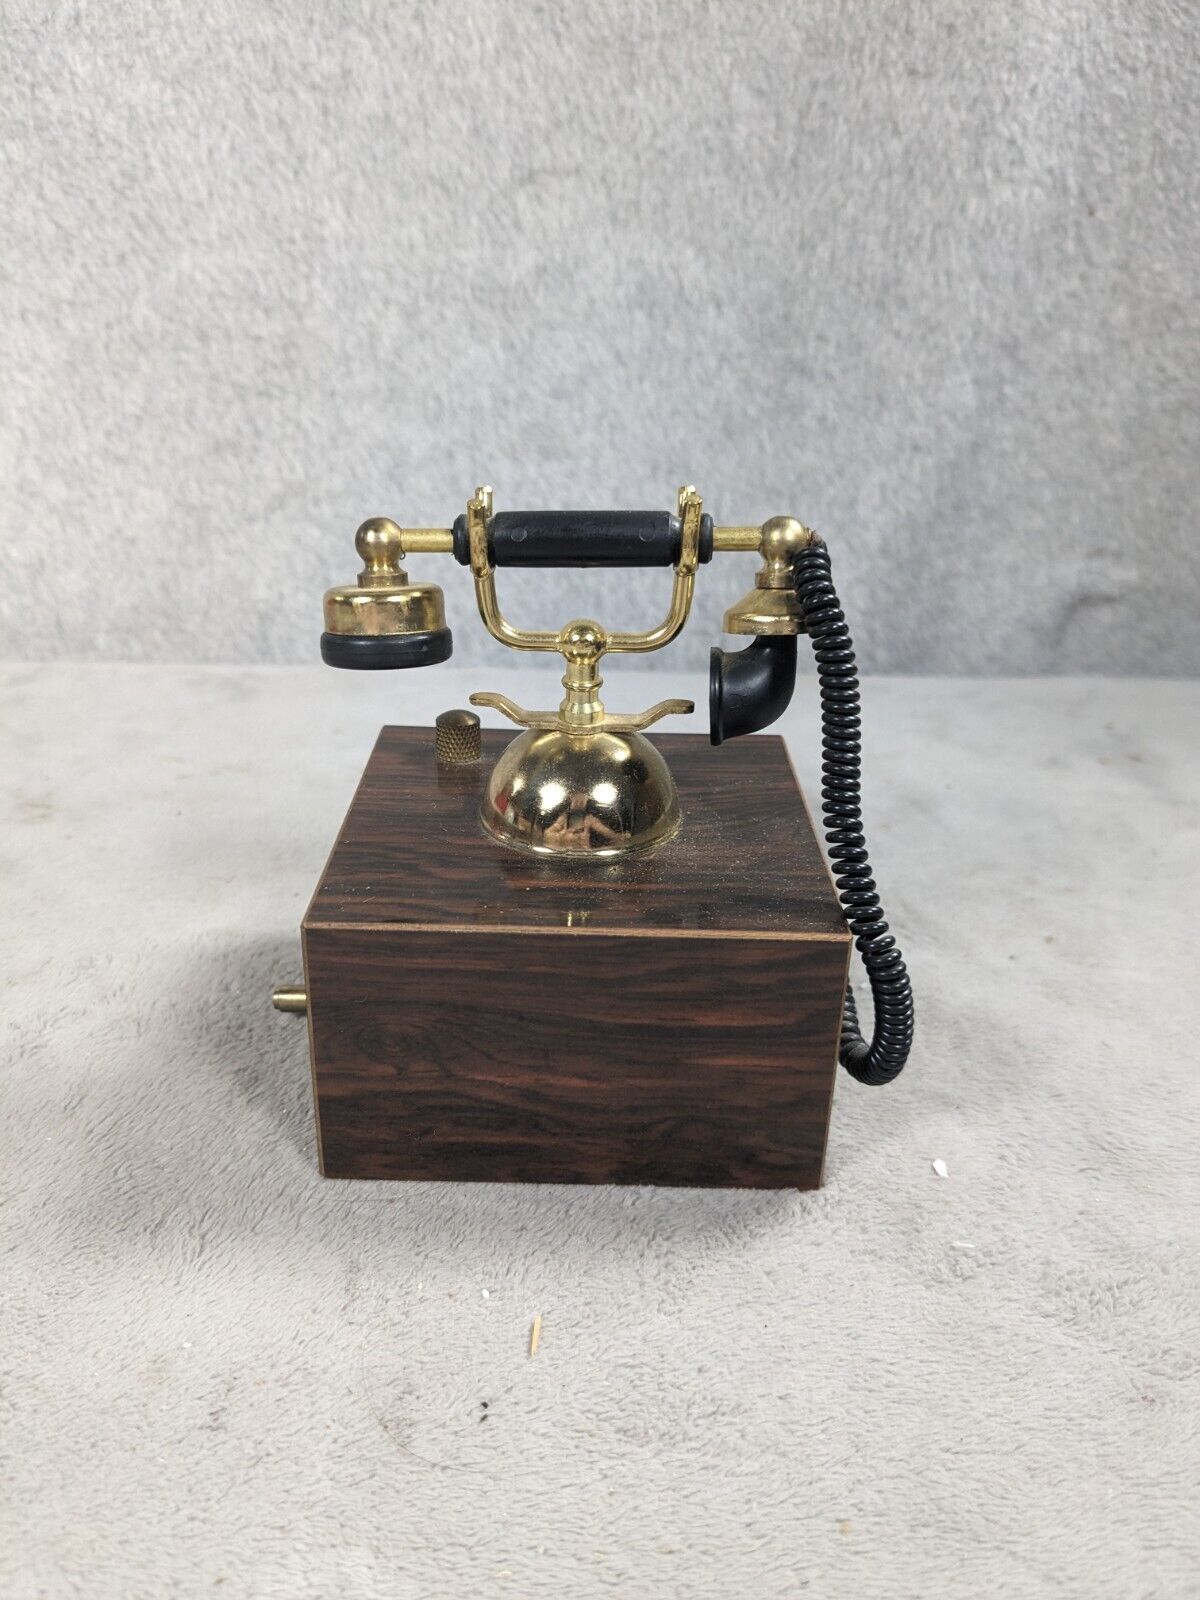 Vintage Wooden Box Telephone Music Box Classic Corded Phone Design